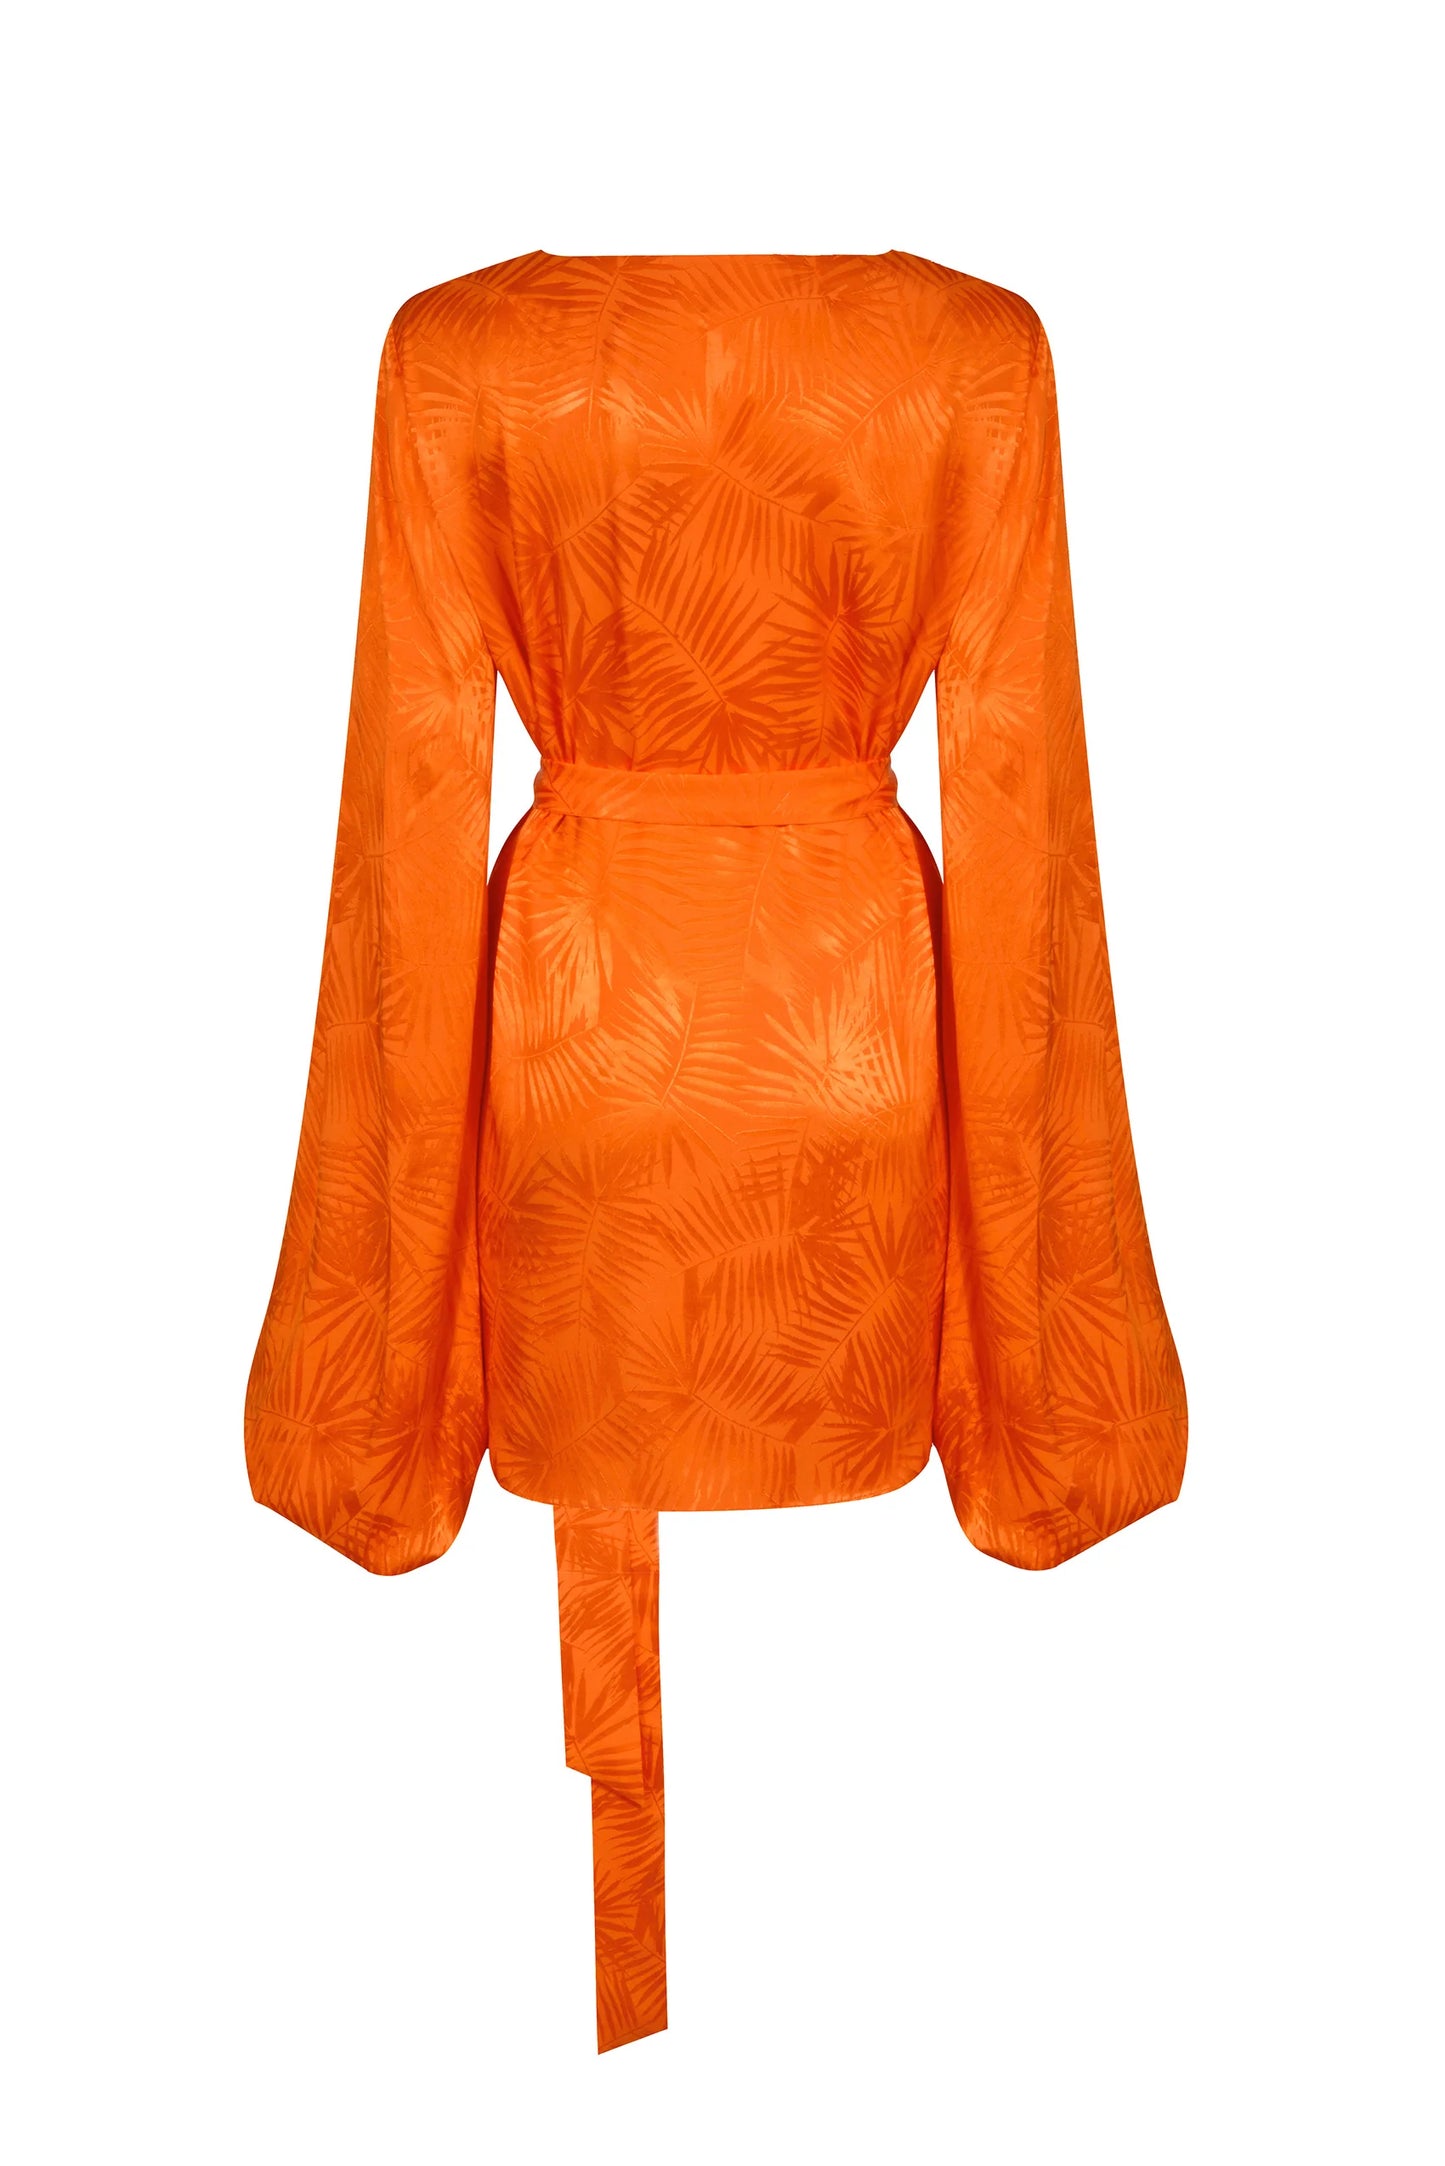 An orange blouse with a long sleeve.